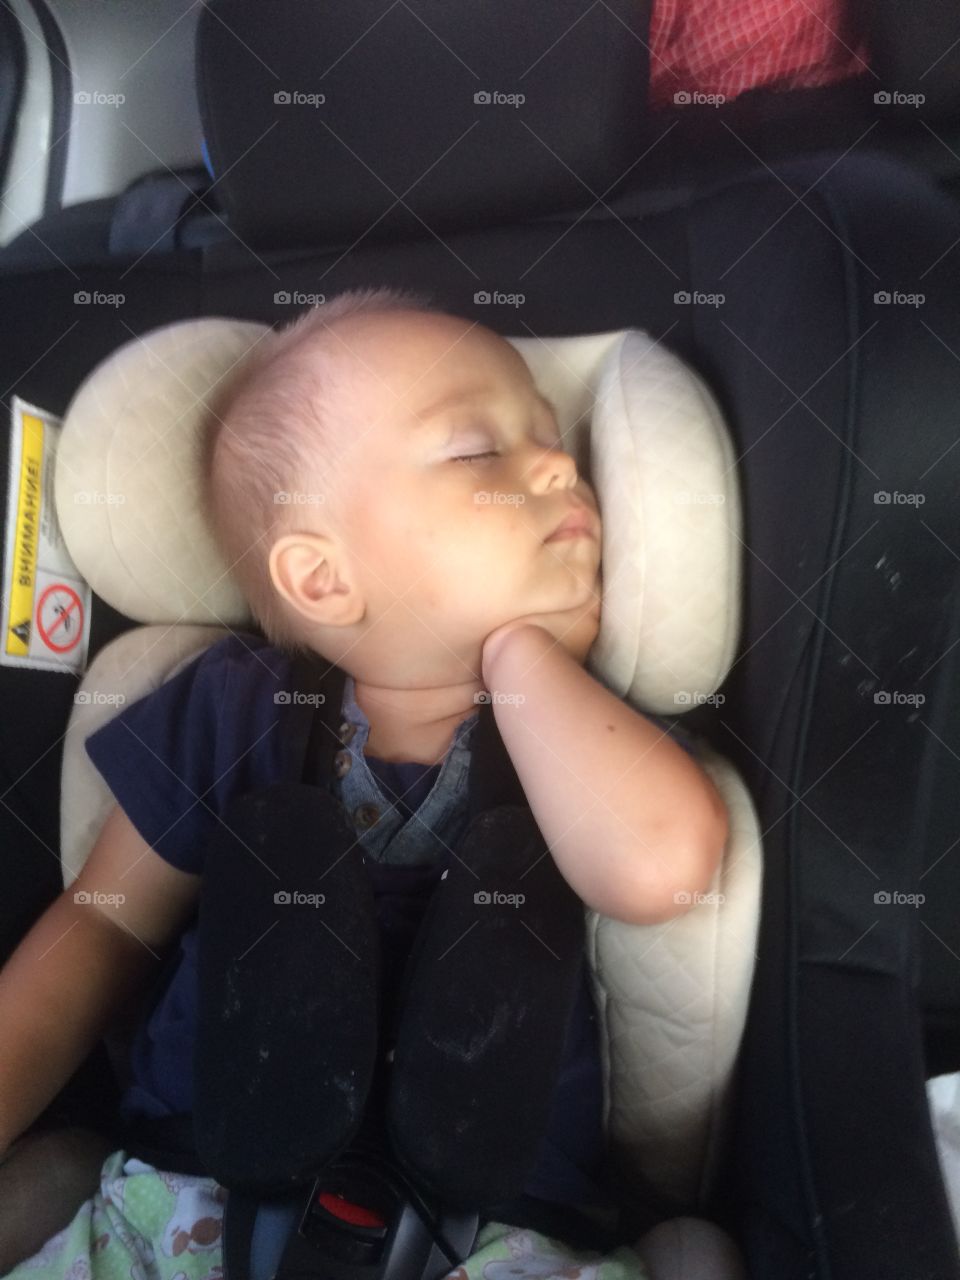 When you’re tired...little kid sleep in car...